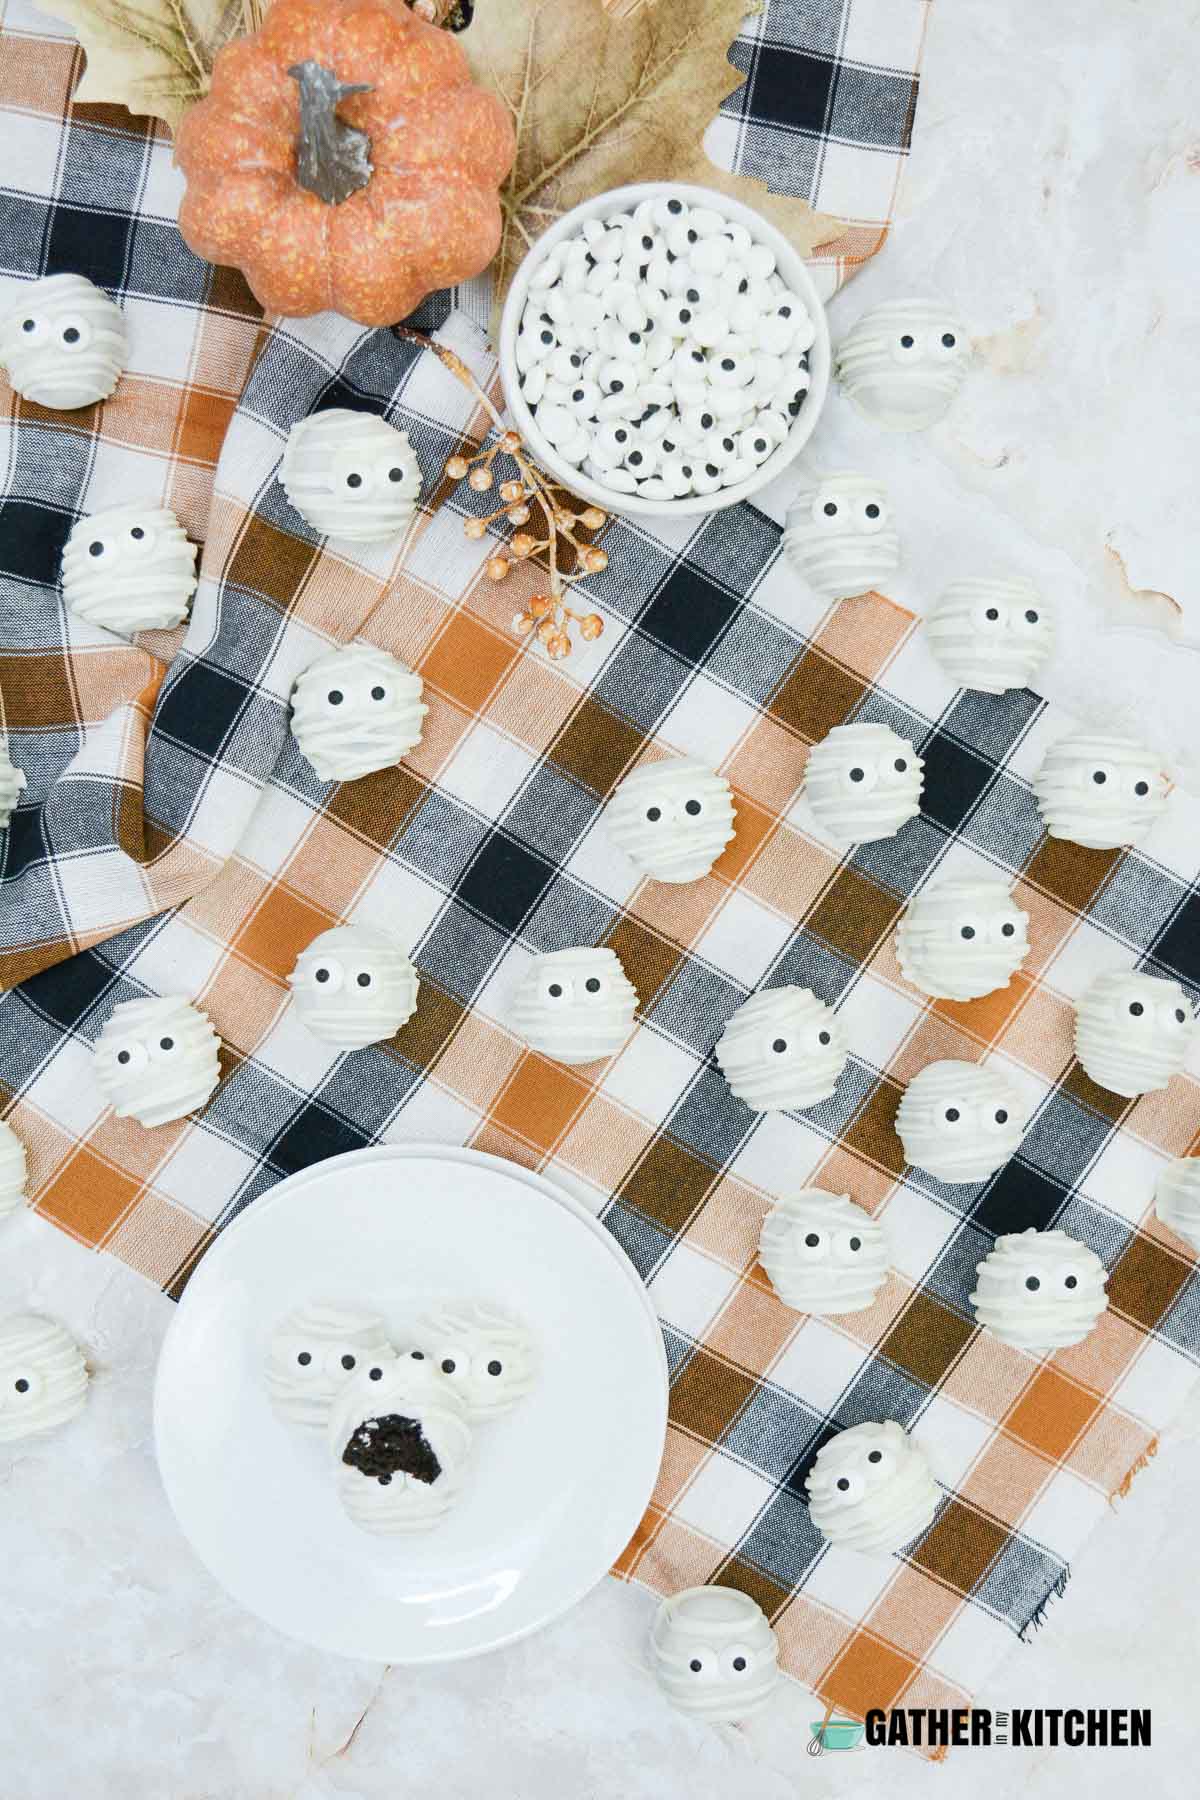 A spread of mummy truffles on a tablecloth and plate.